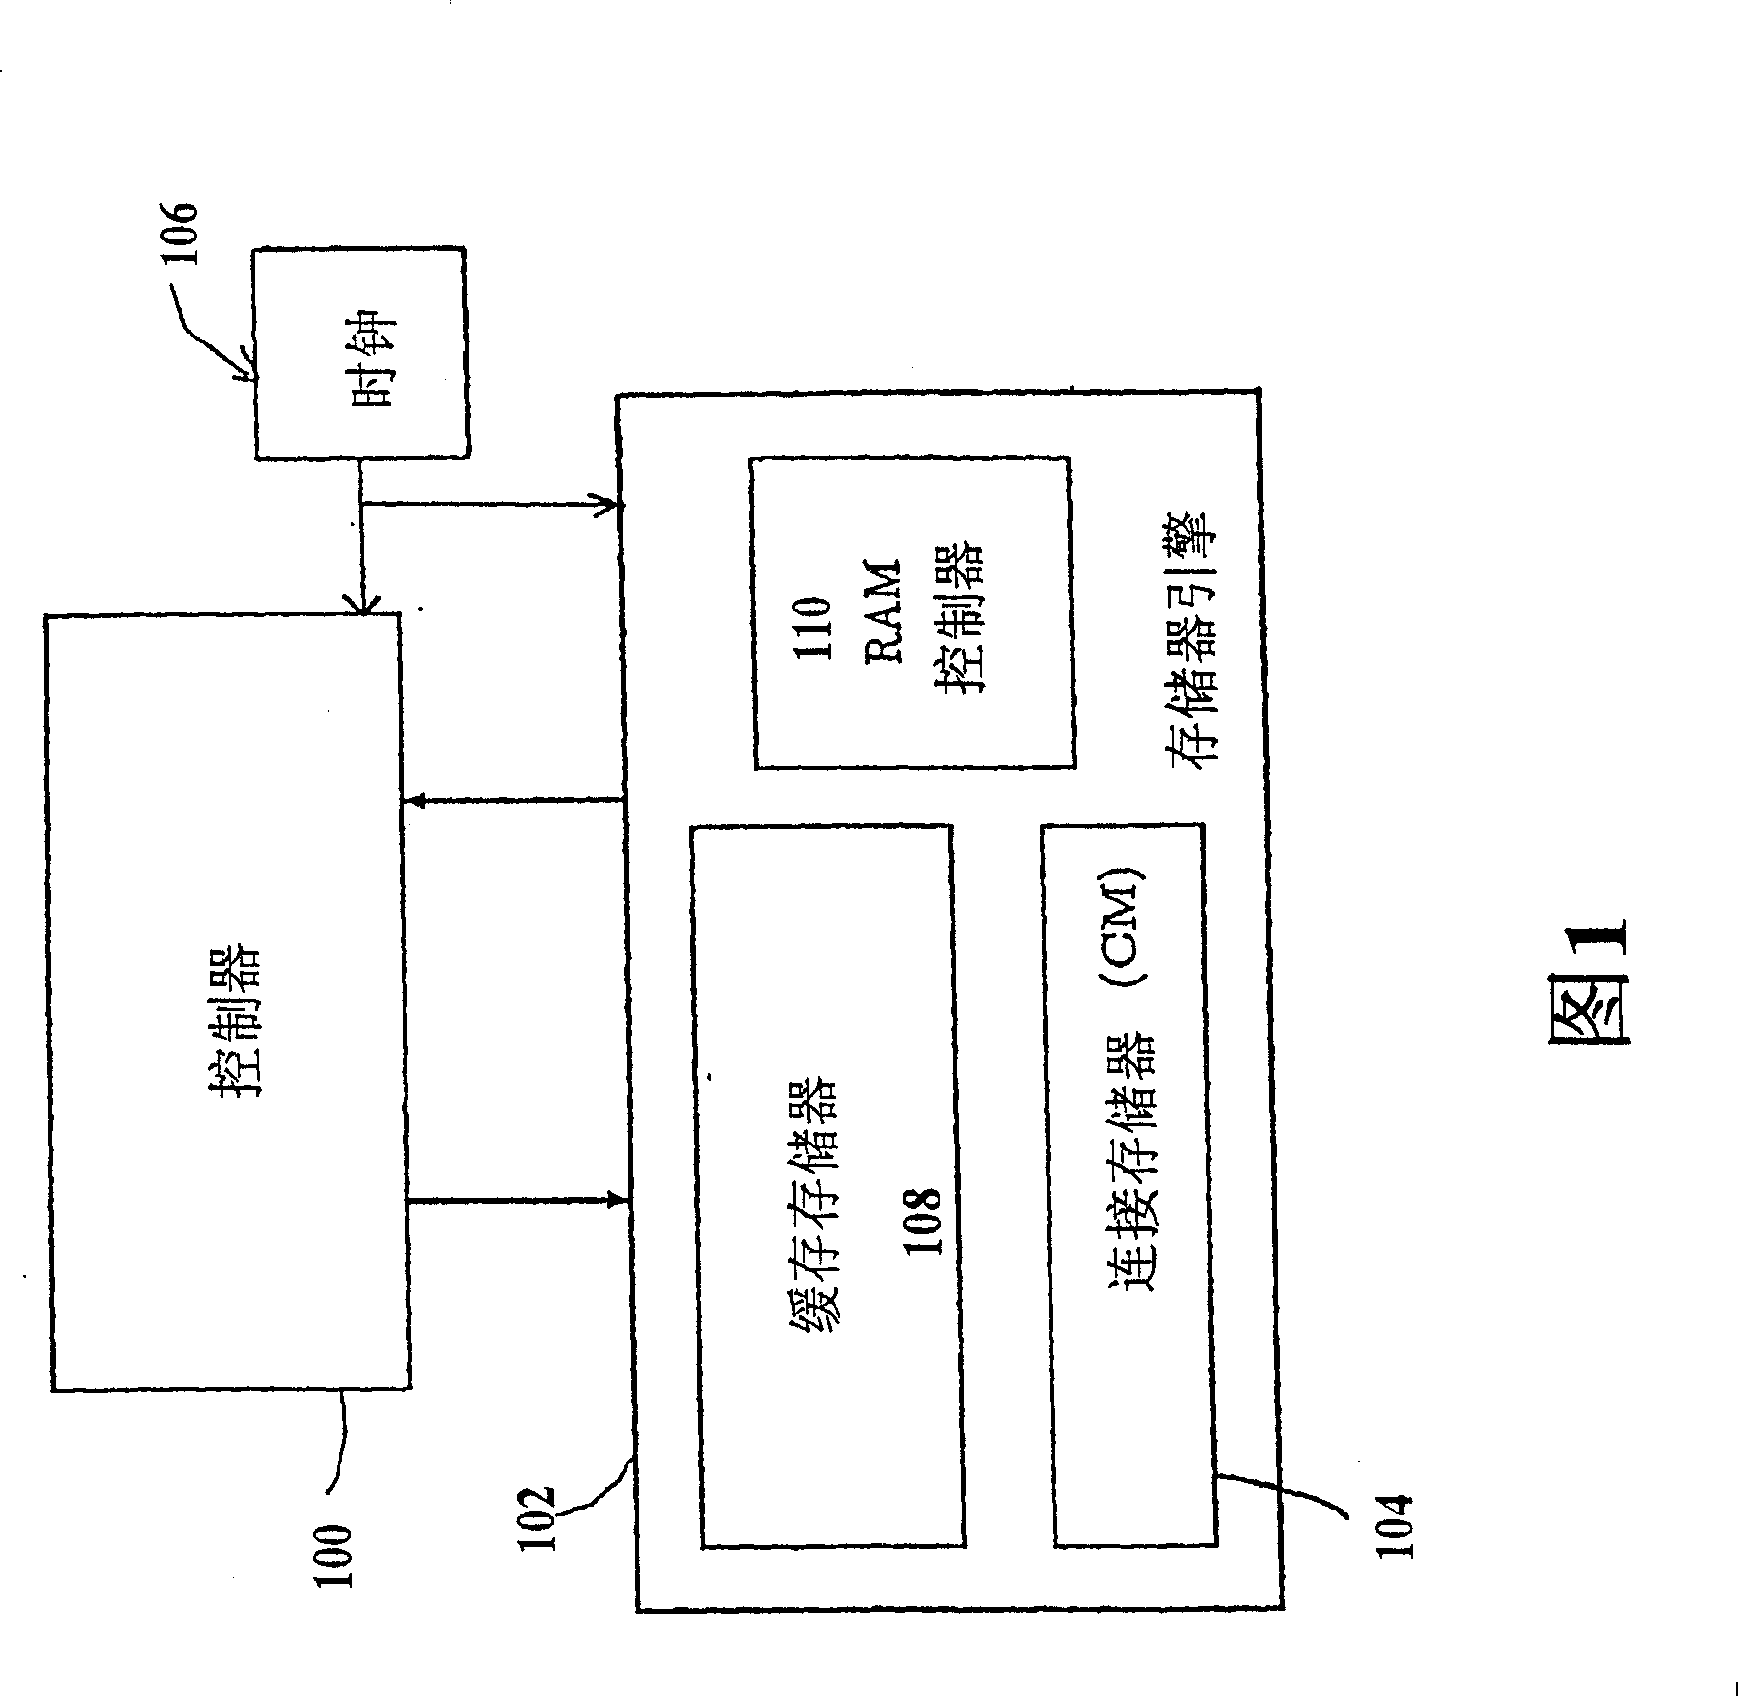 Data processing system having a Cartesian controller, and method for processing data